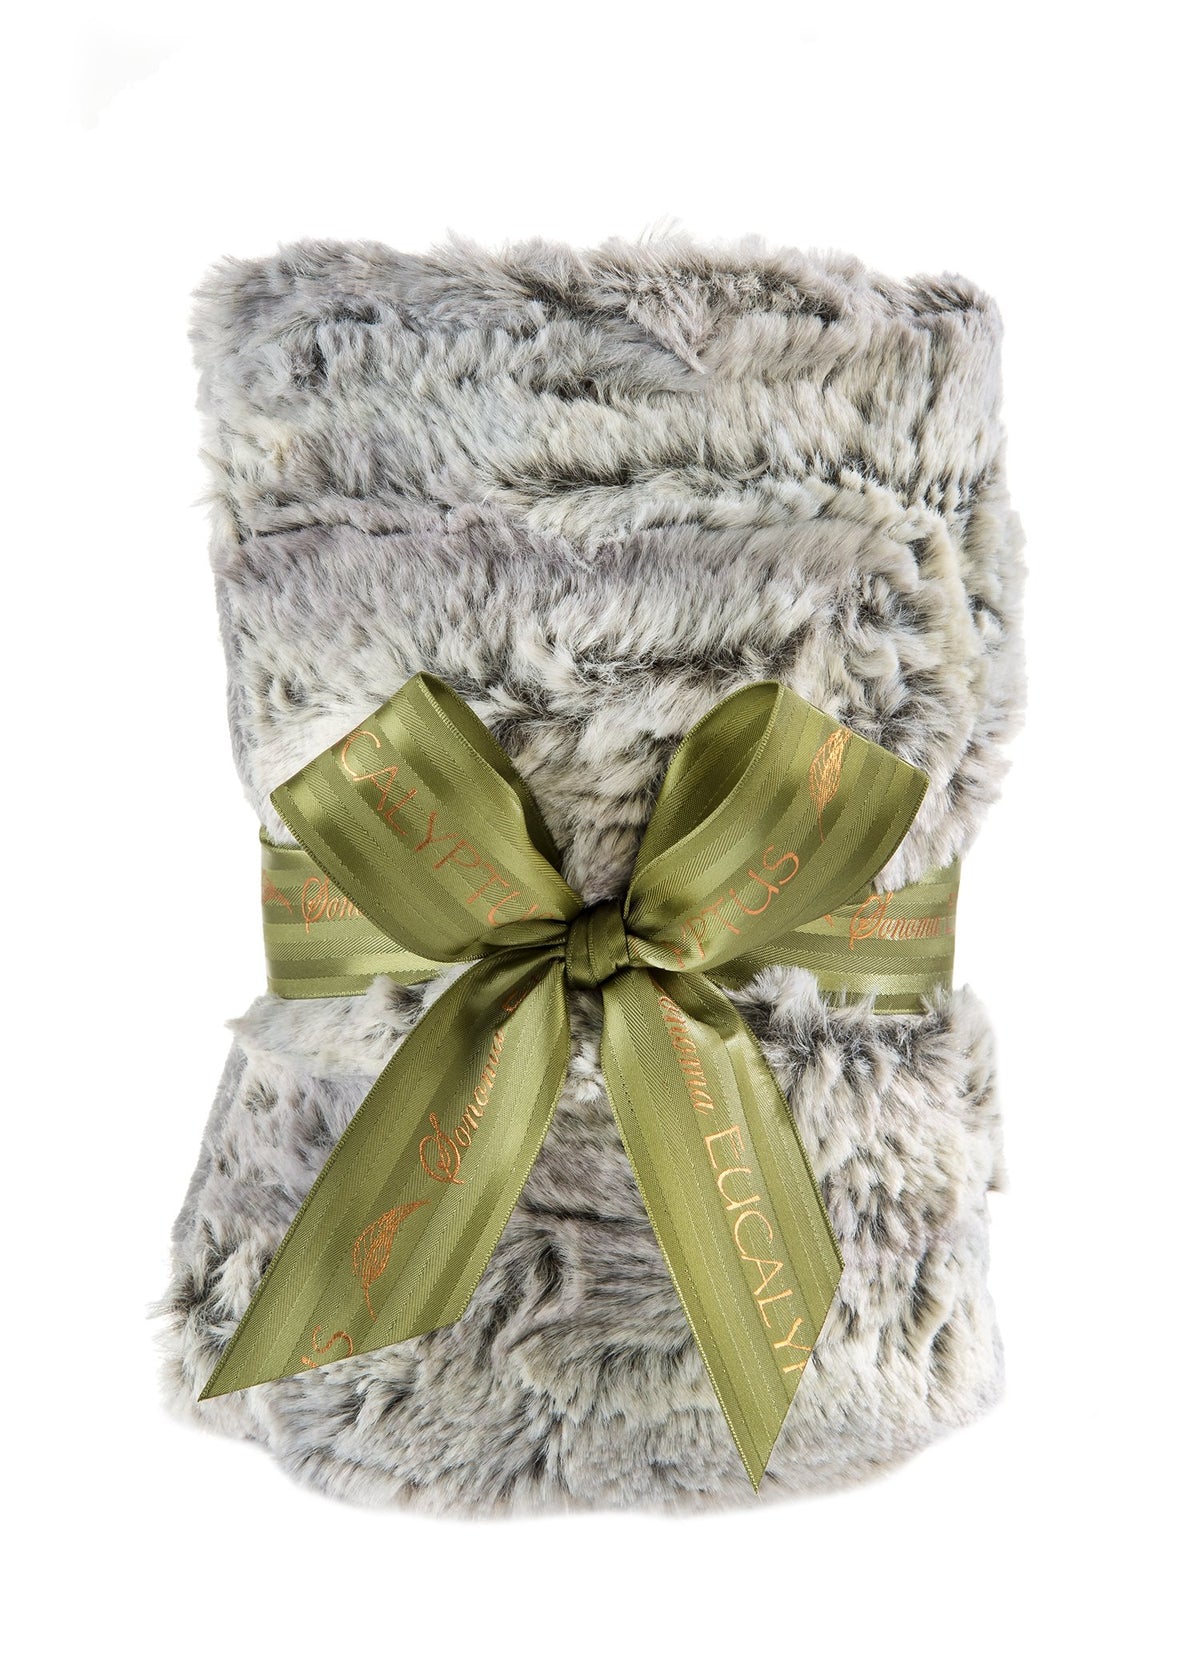 Soft, fuzzy gray SONOMA EUCALYPTUS SILVER FOX HEAT WRAP tied with a shiny olive green ribbon printed with gold text, presented against a white background.